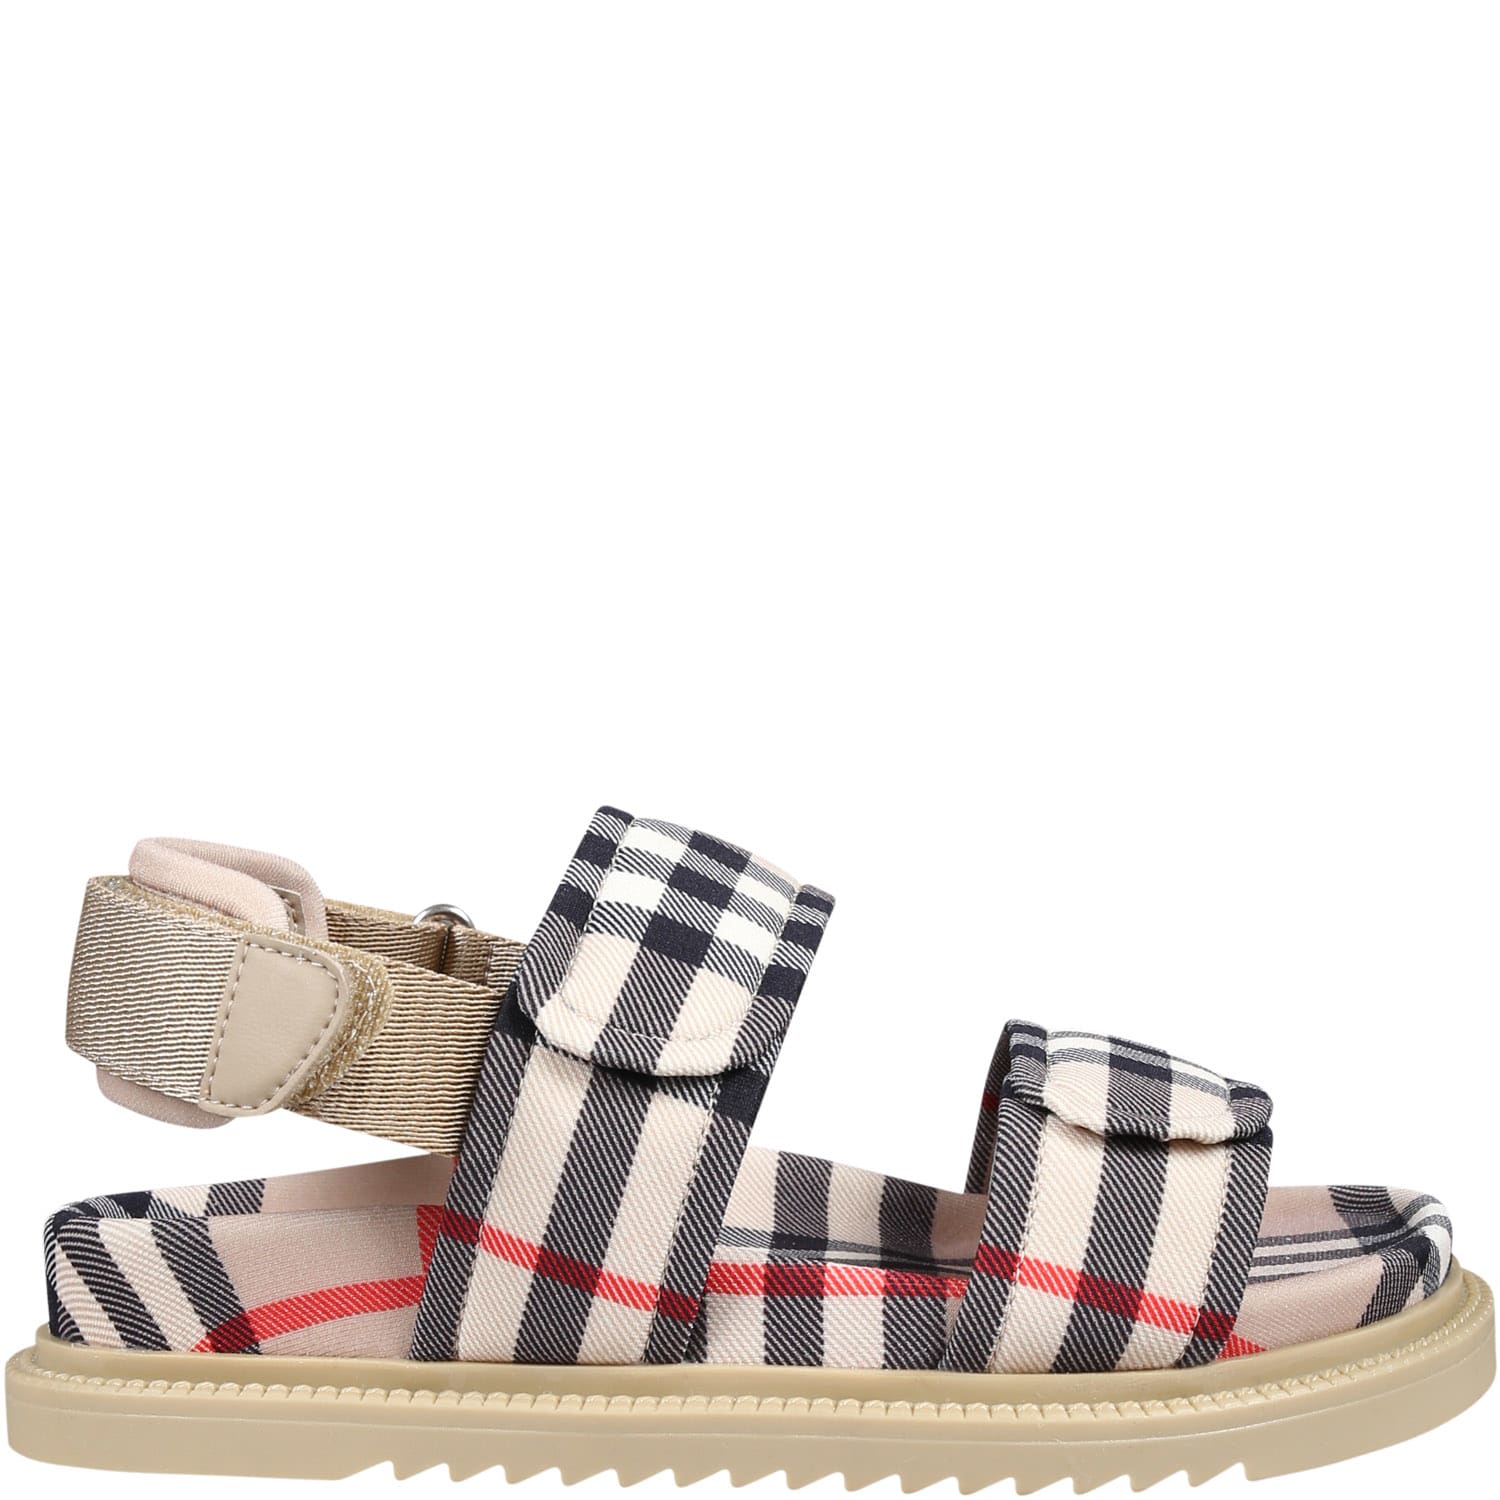 Shop Burberry Beige Sandals For Kids With Vintage Check